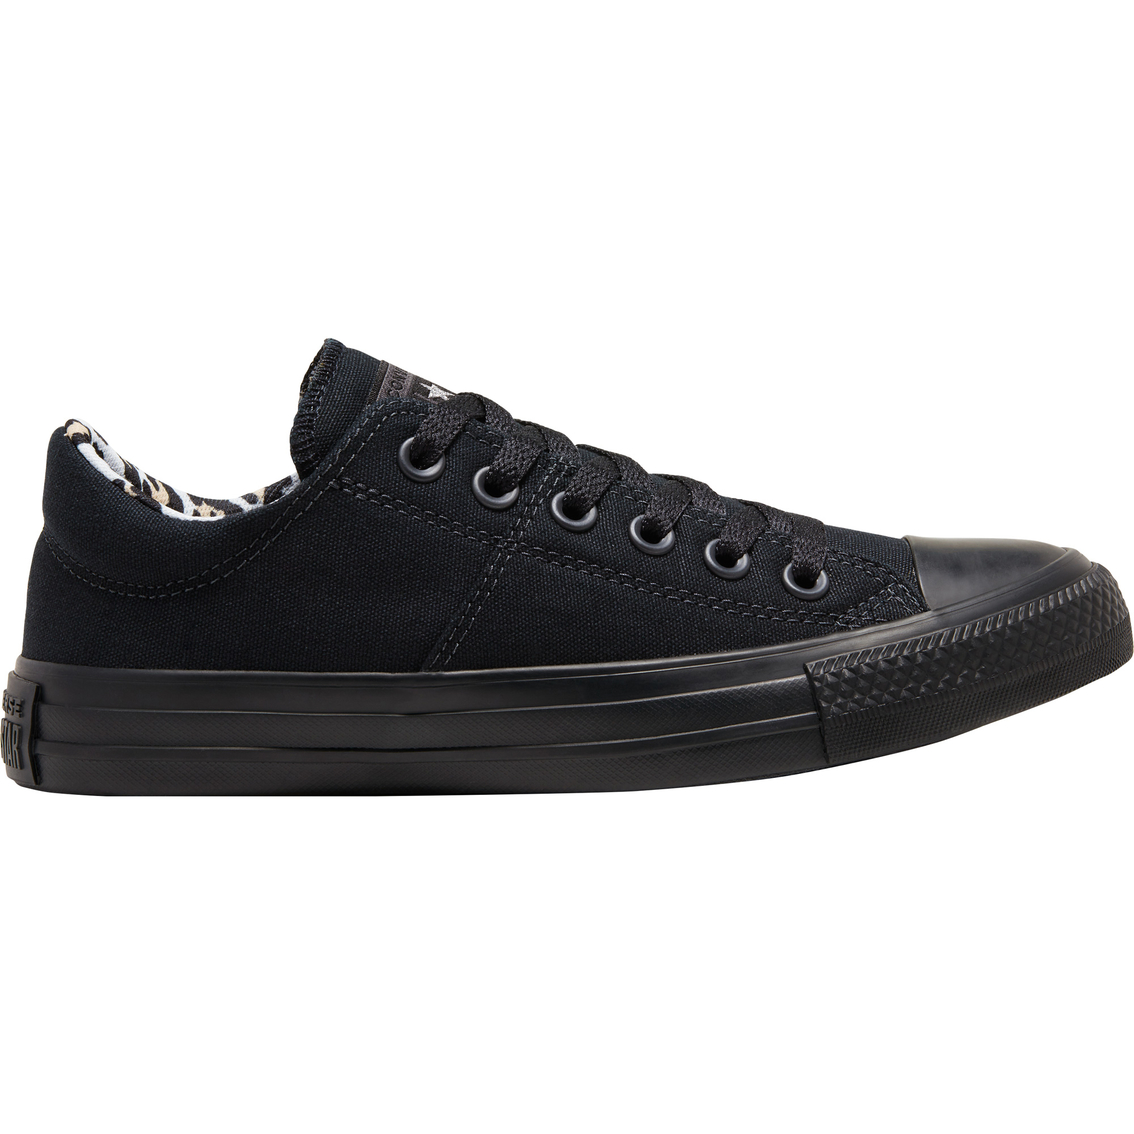 converse women's chuck taylor all star madison low top sneaker